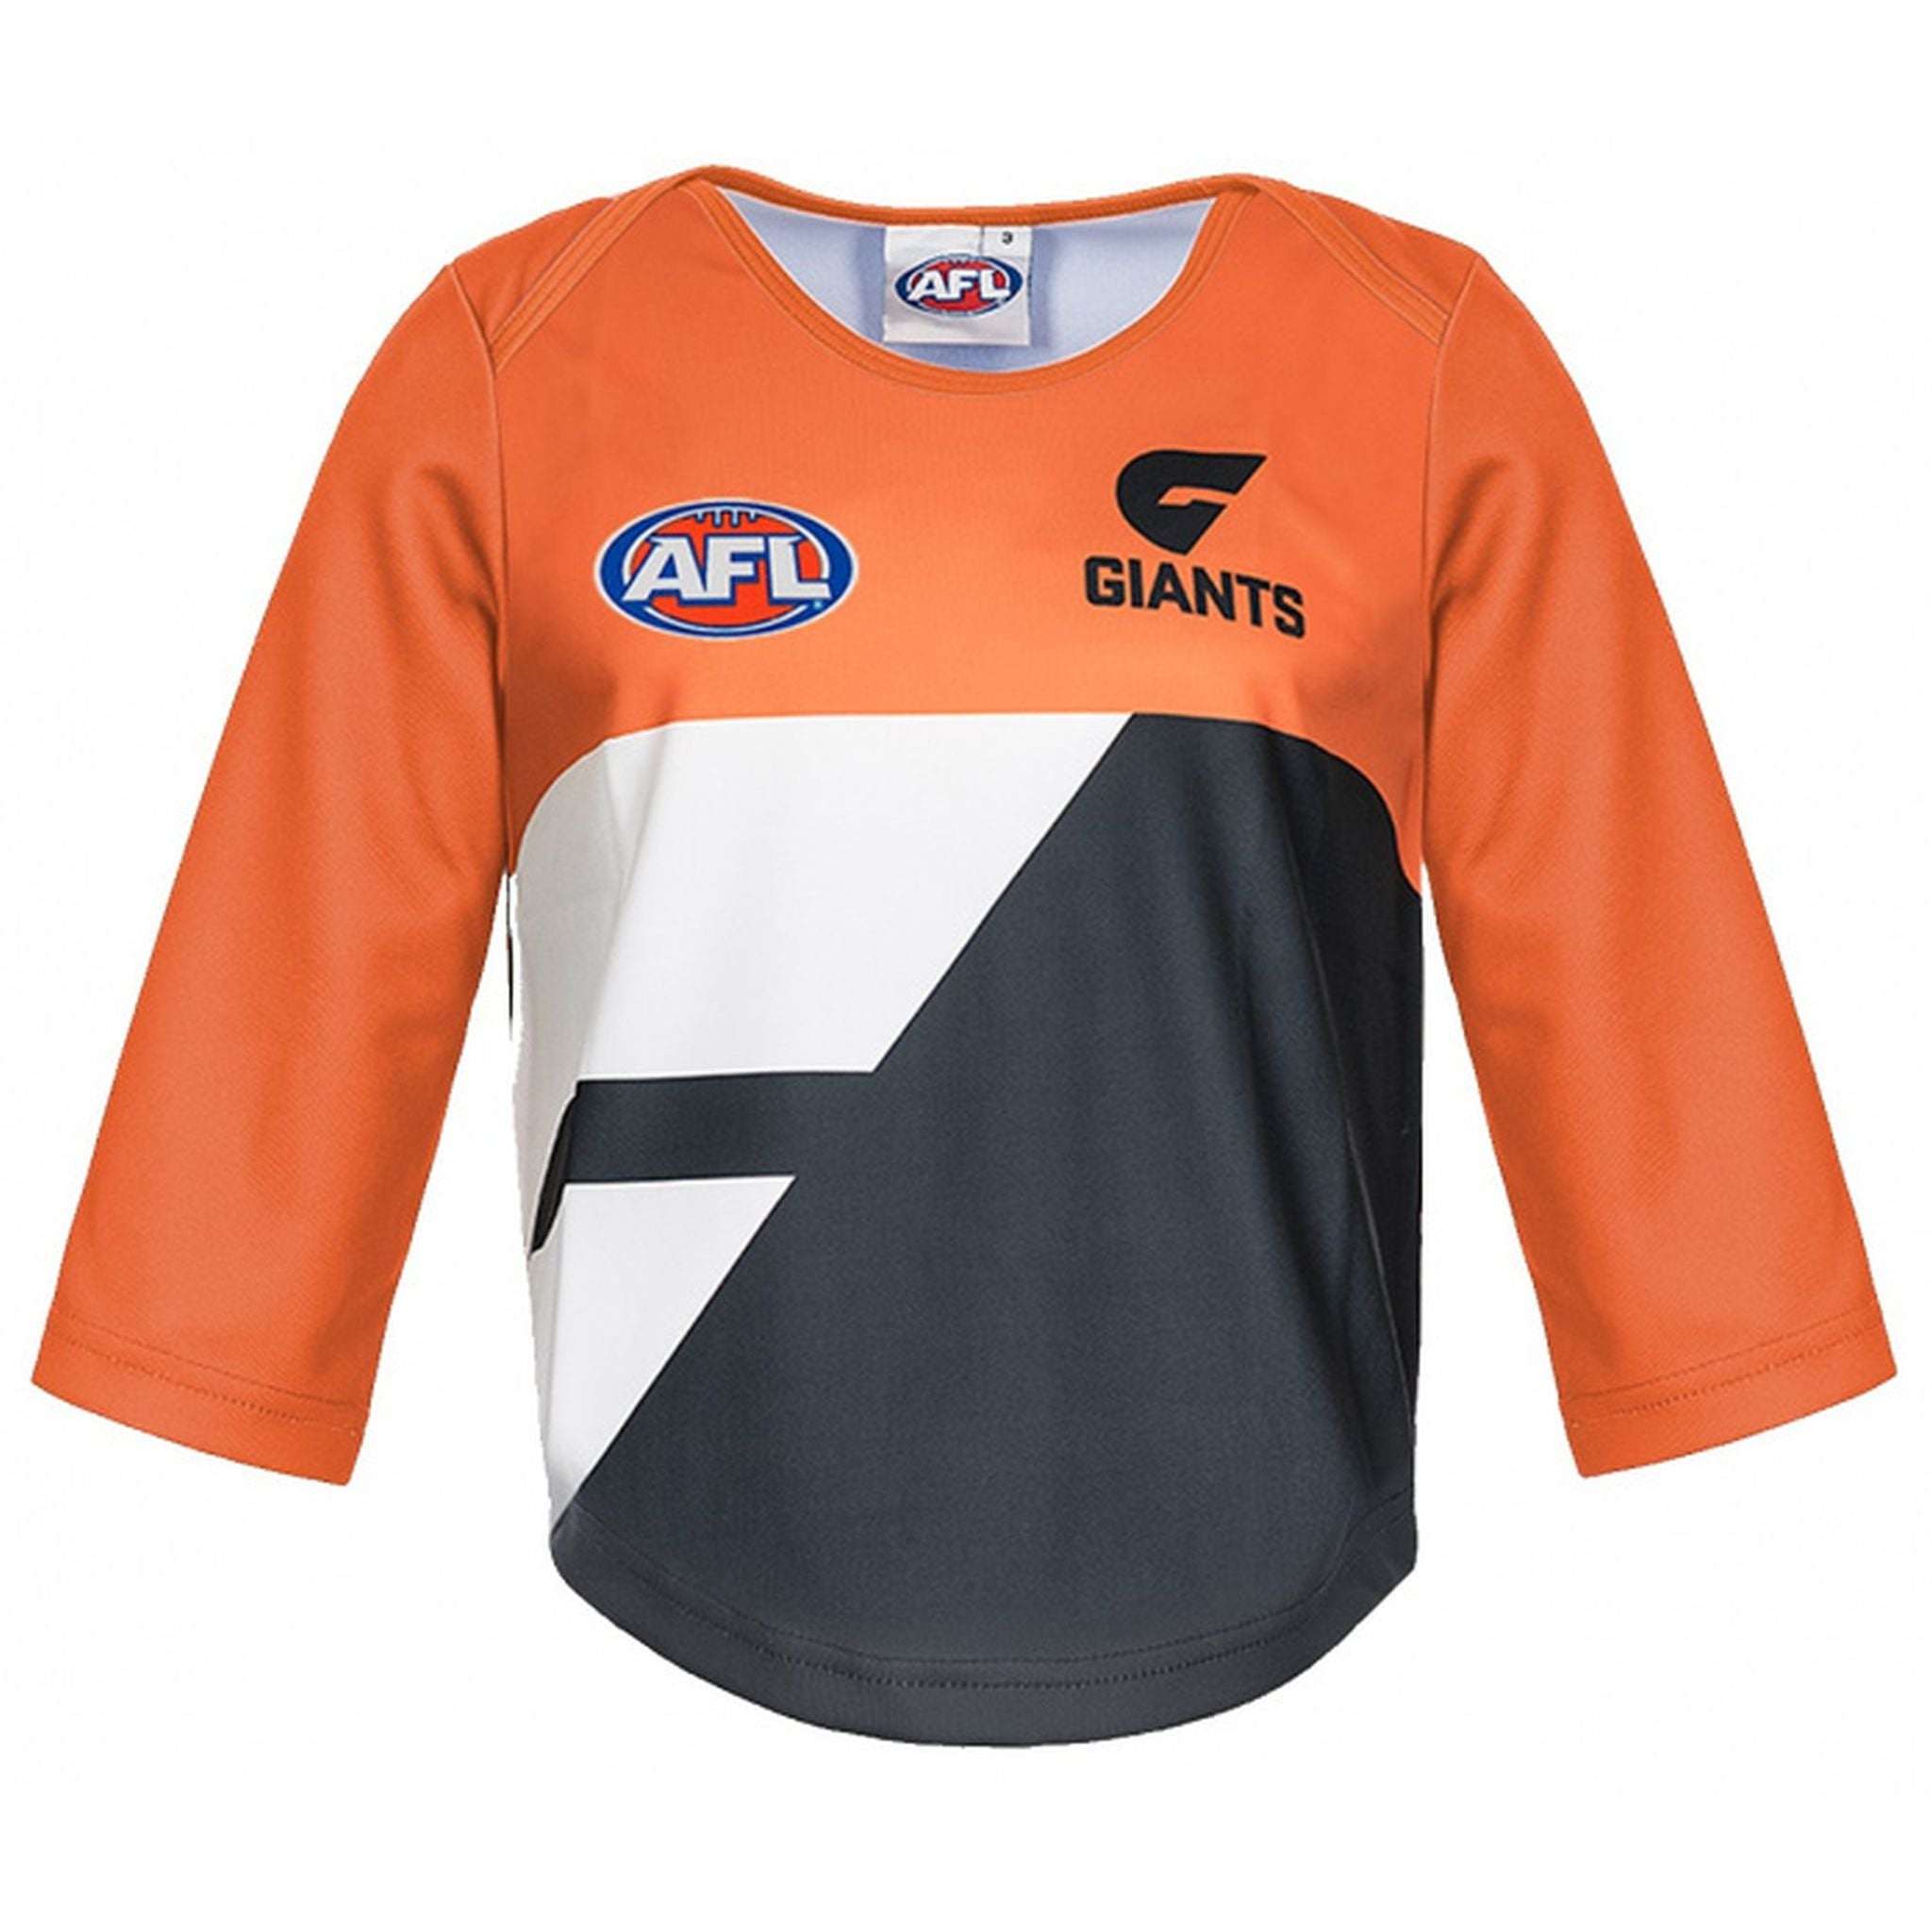 Burley GWS Giants AFL Infant Long Sleeve Replica Guernsey - (SIZE 2)